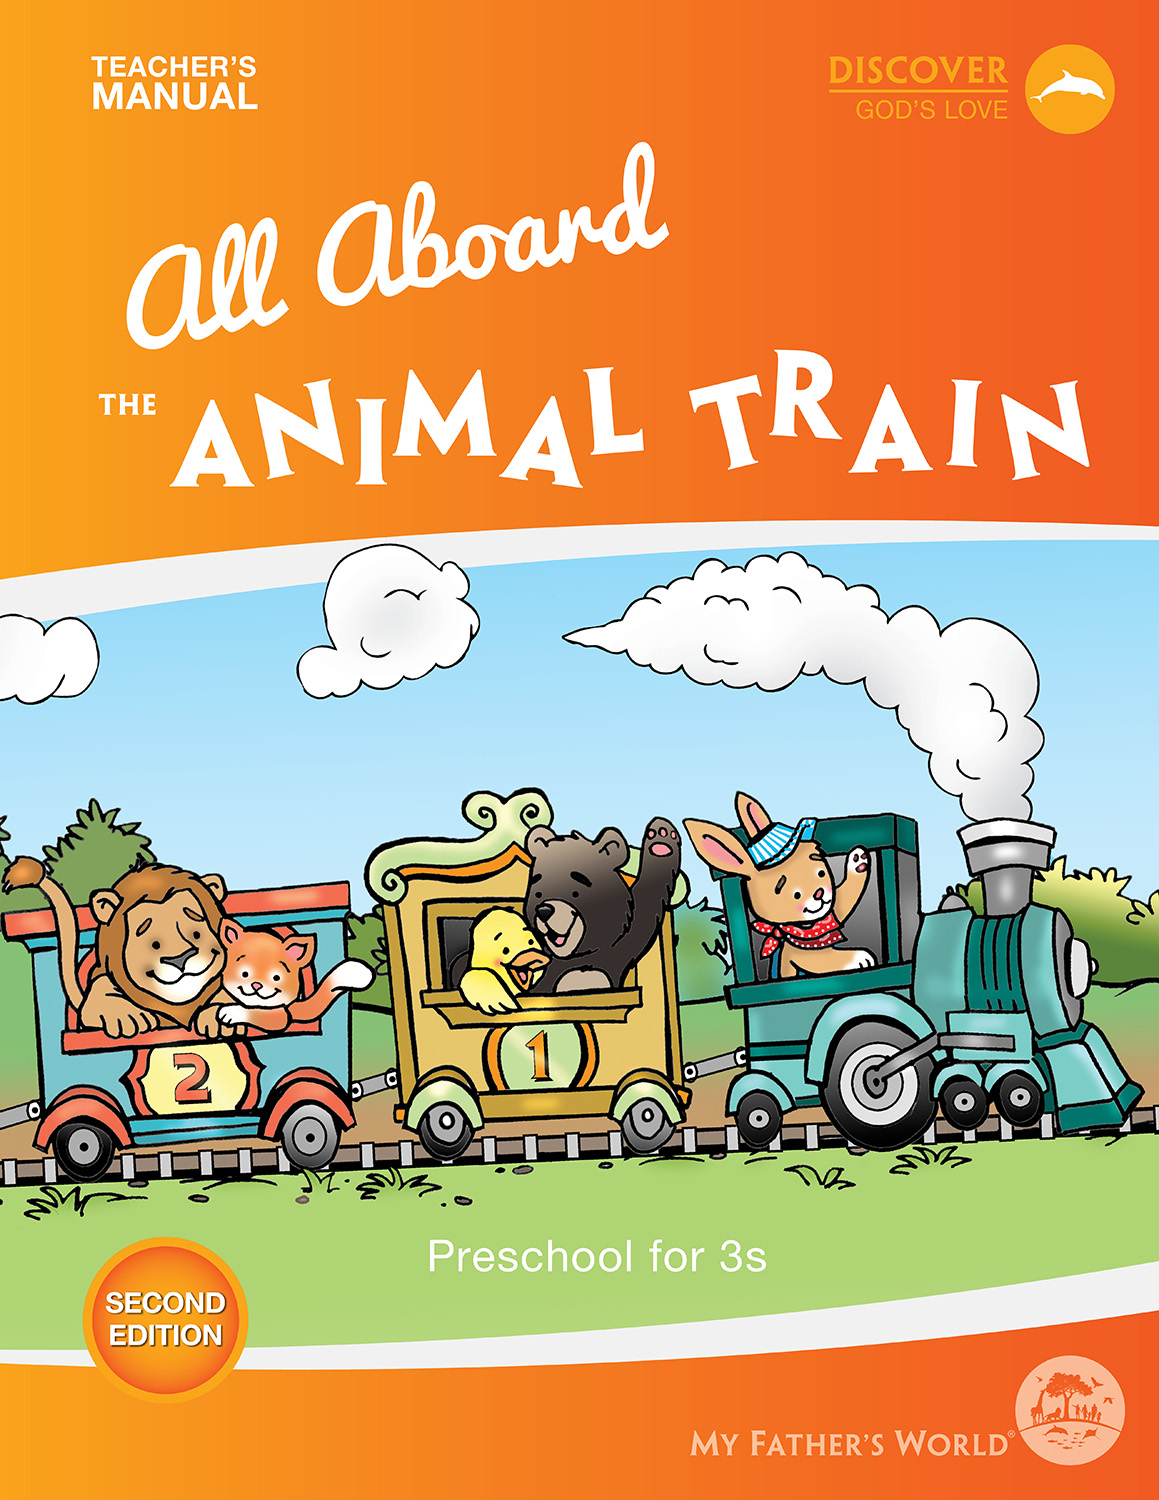 All Aboard the Animal Train Package